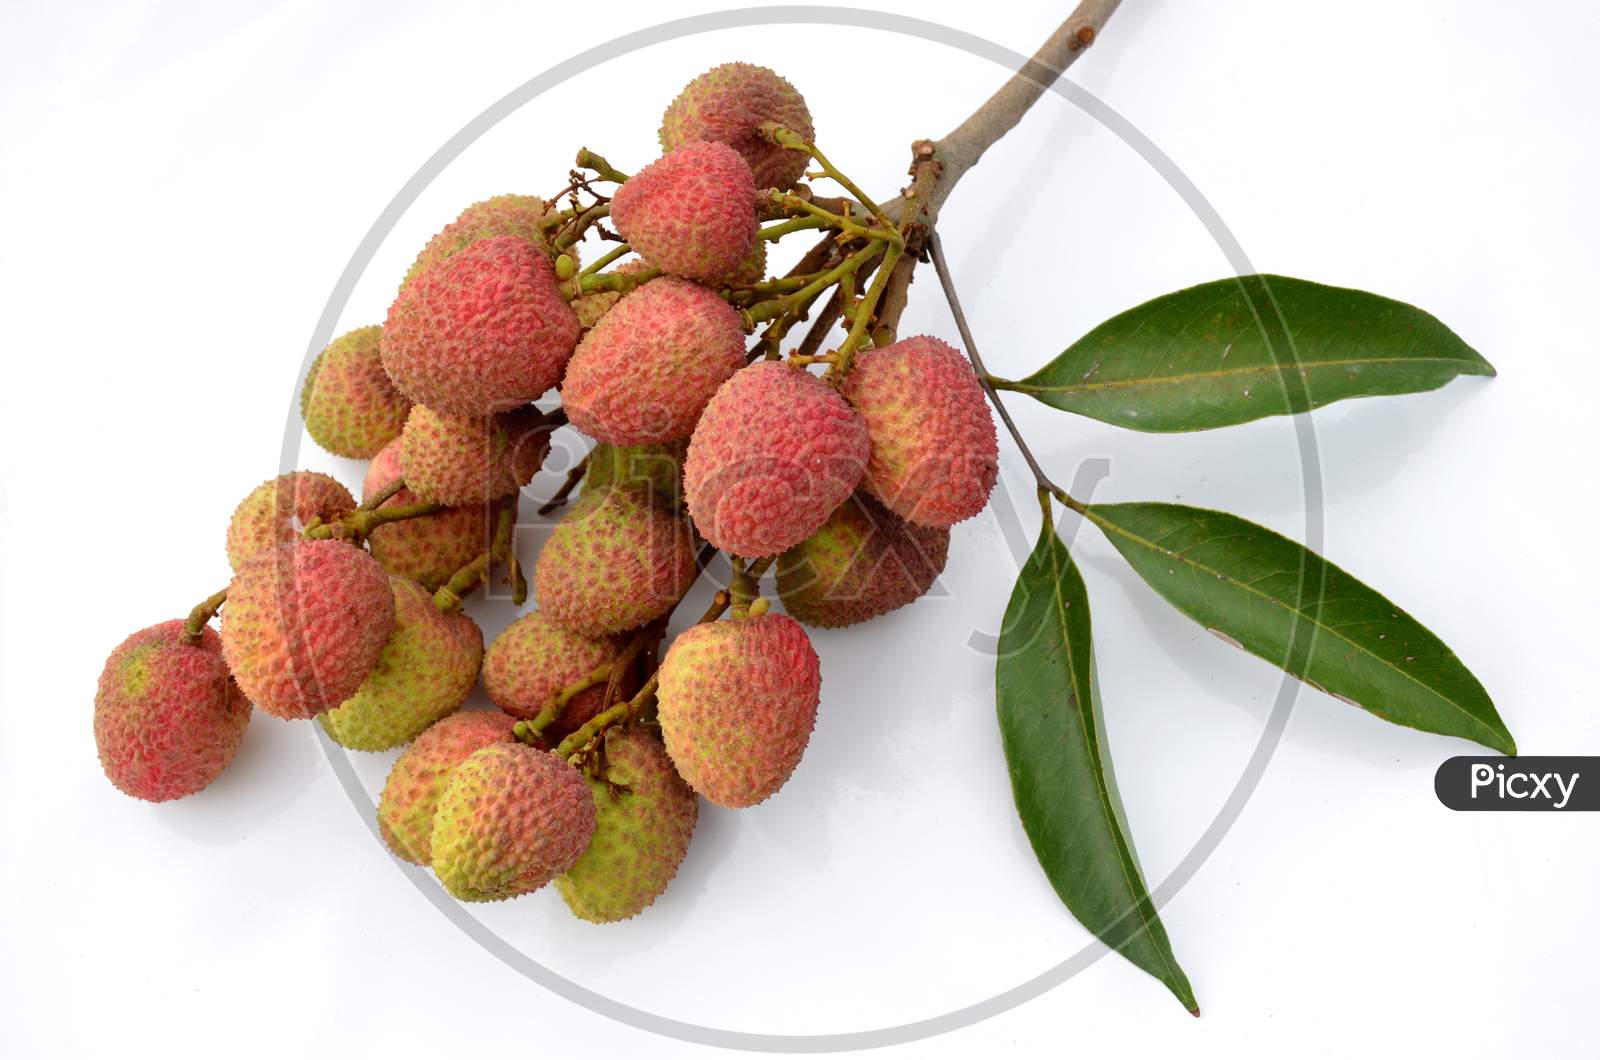 bunch of the red ripe lychee with leaves isolated on white background.